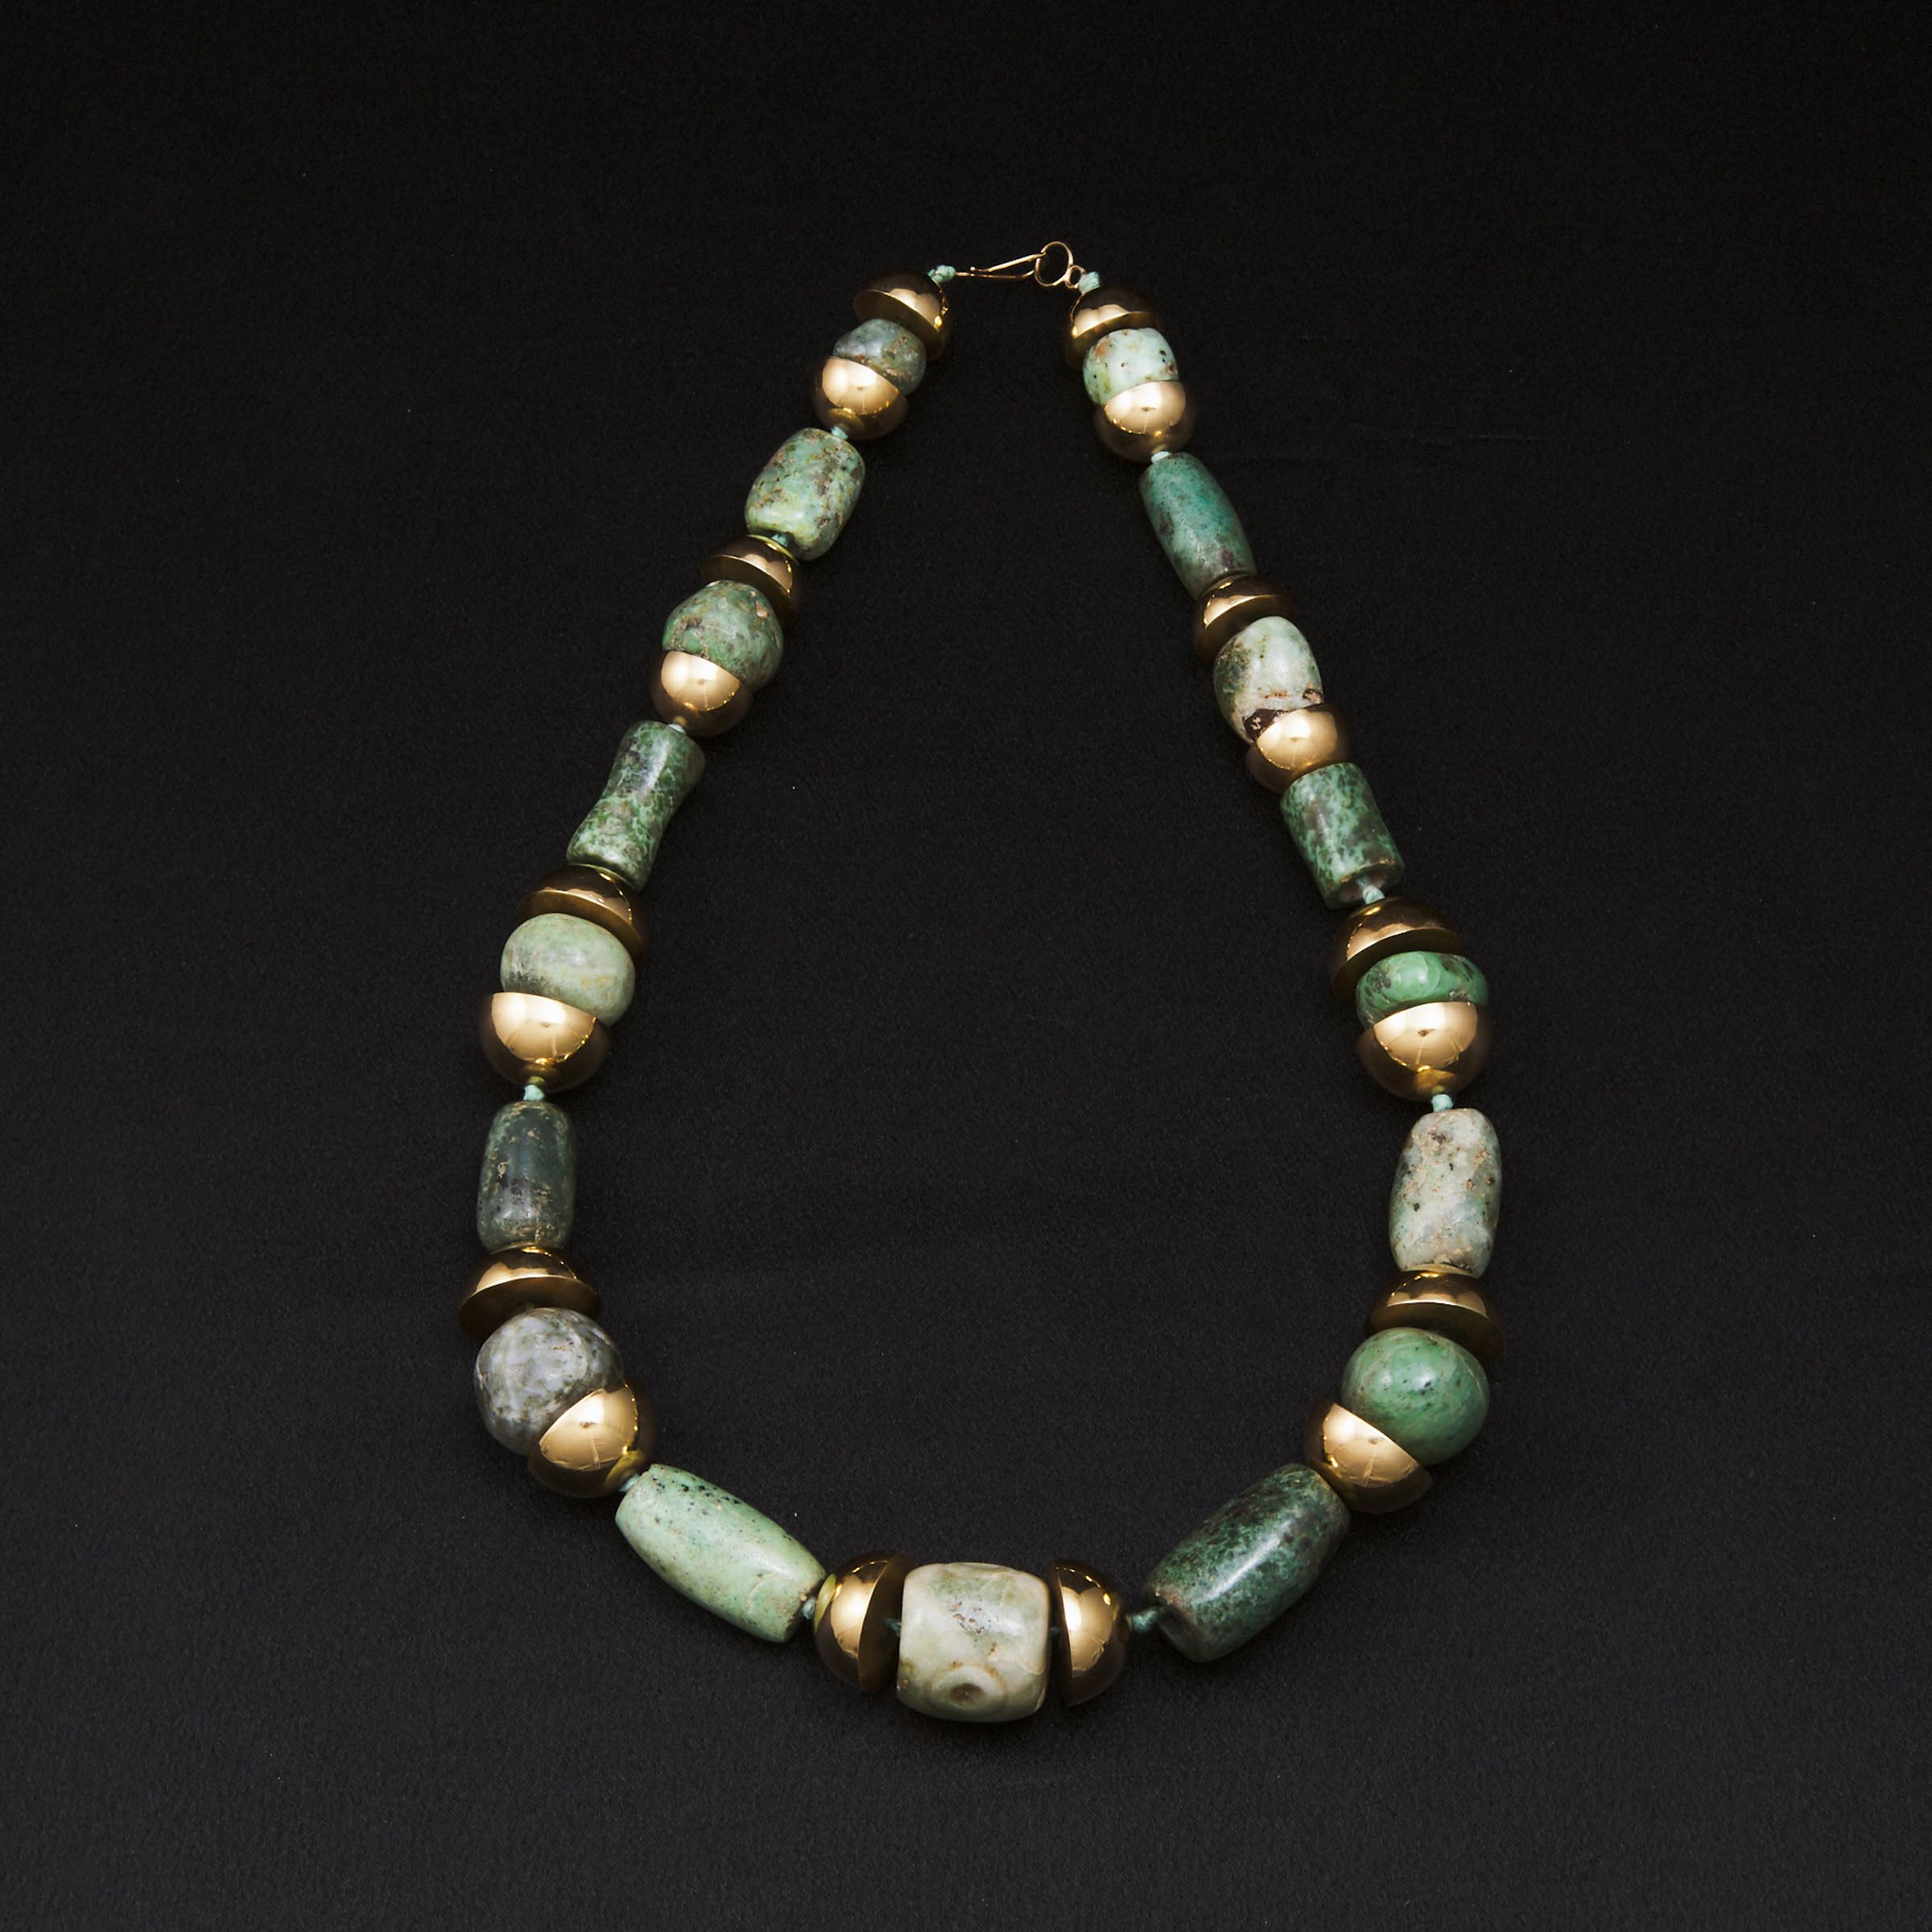 An Ancient Jadeite Beaded Necklace, Pre-Columbian, 5th Century, With 14K Yellow Gold Spacers, Circa 1970